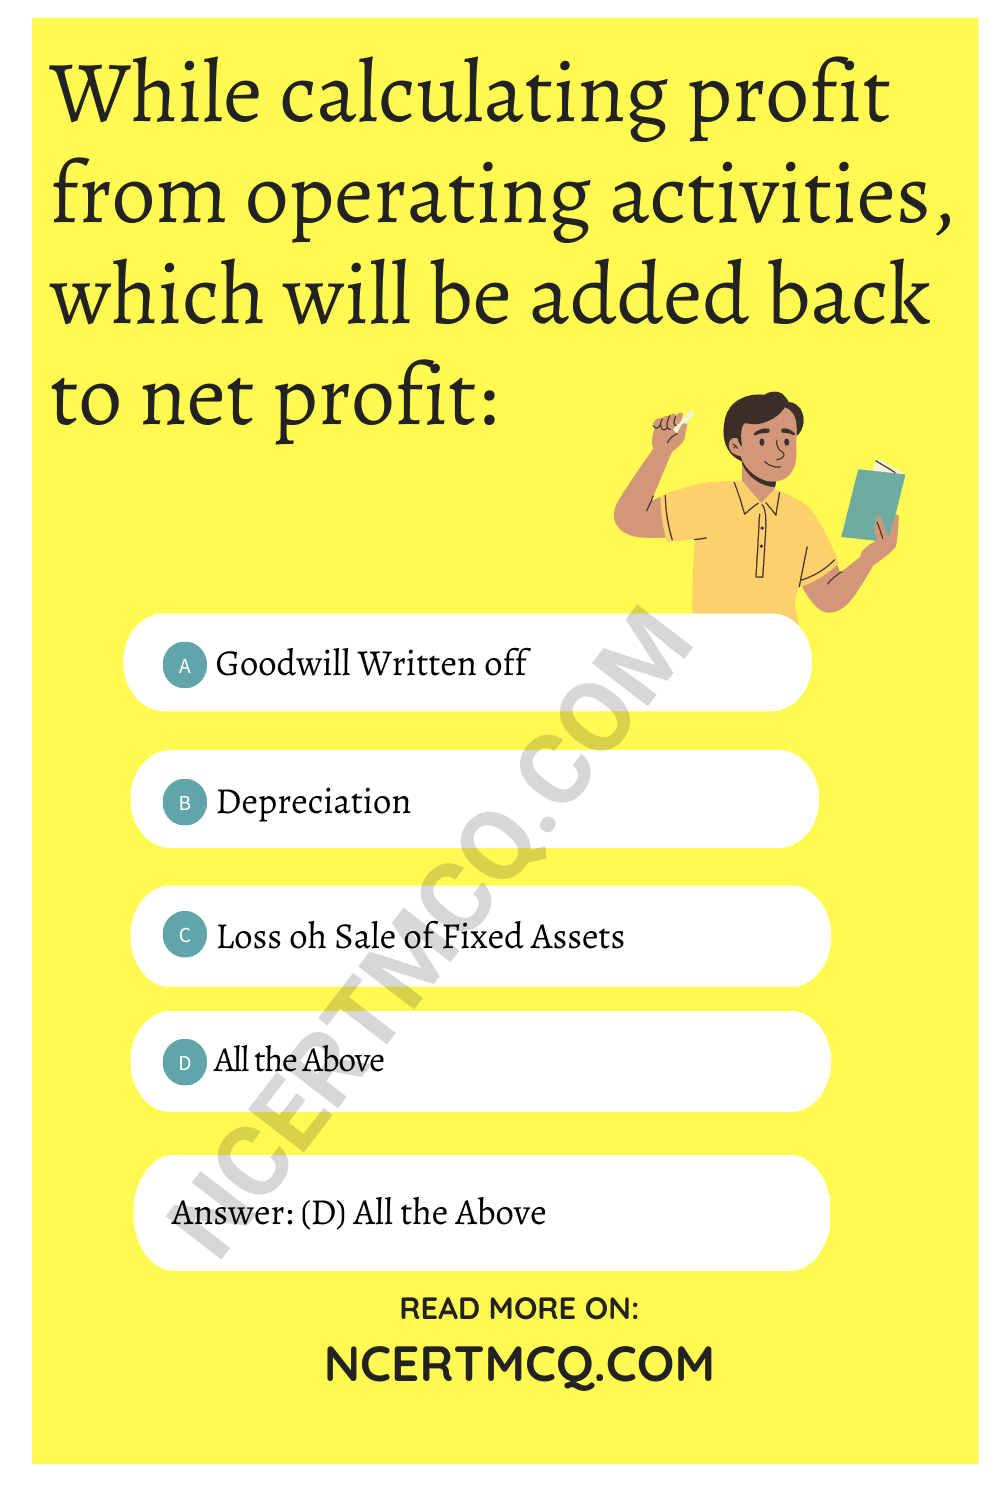 While calculating profit from operating activities, which will be added back to net profit: